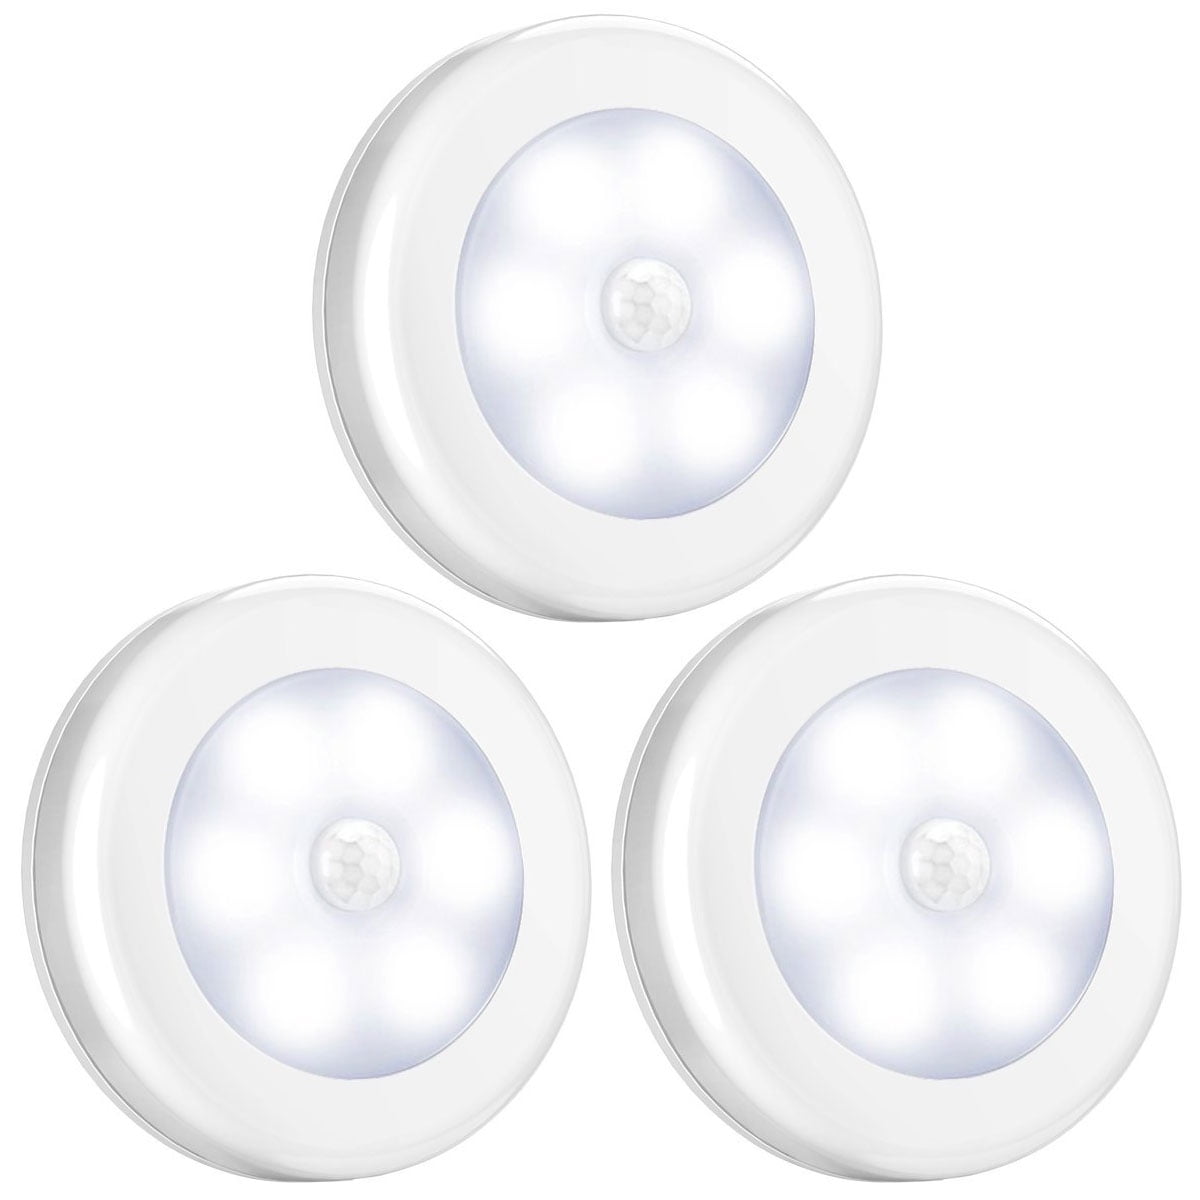 Battery Operated Lights Wall Light Cabinet Pack of 6 Motion Sensor Light Stick Anywhere with No Tools Perfect for Staircase Bathroom Closet Light LED Night Lights Hallway Bedroom Kitchen 